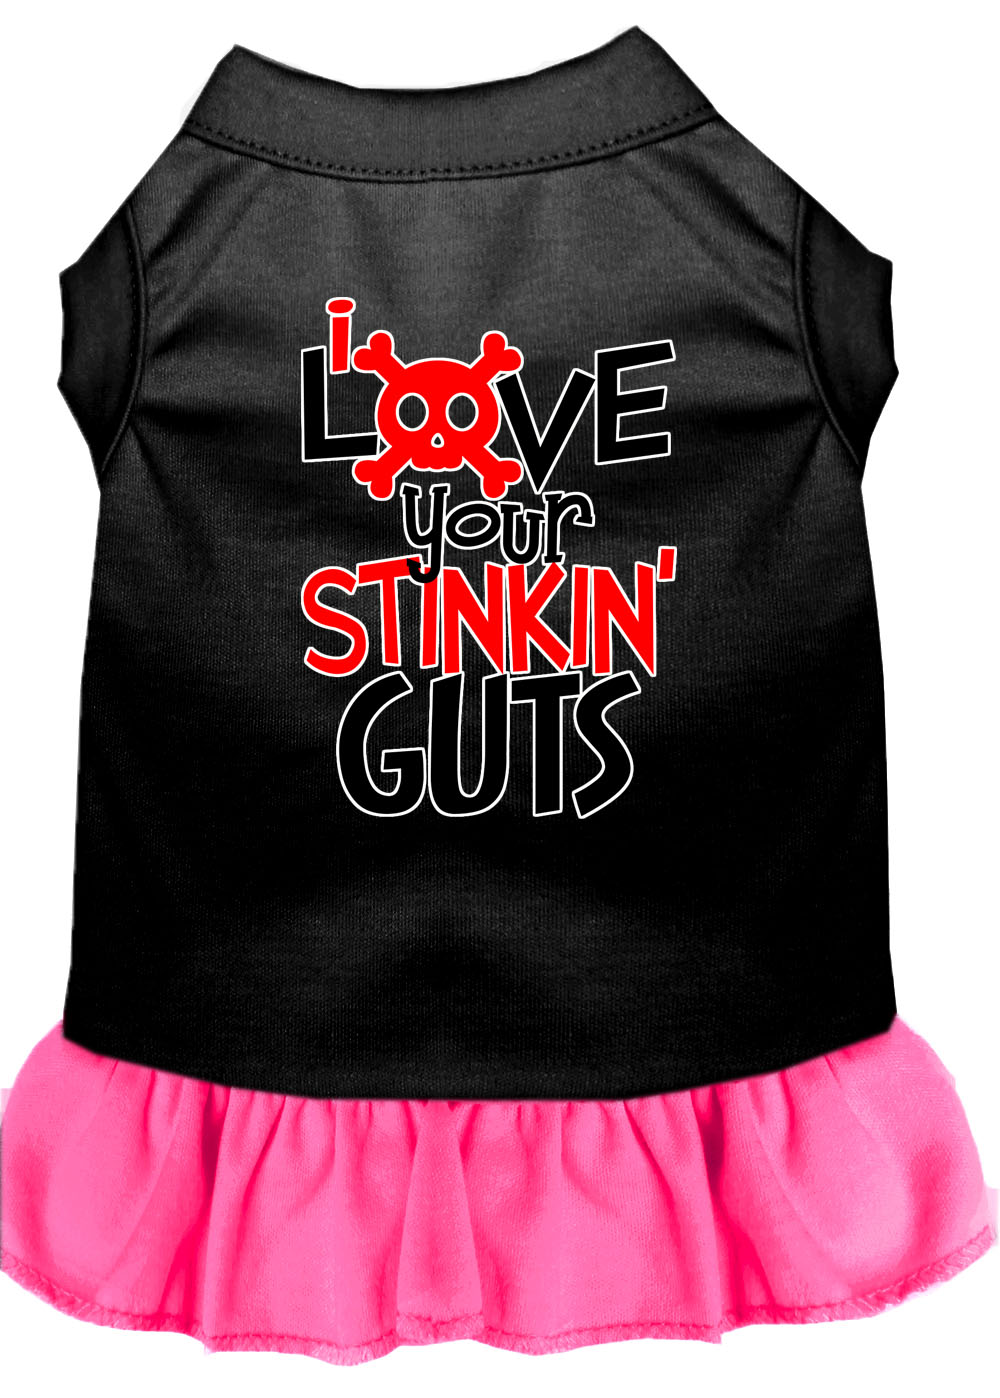 Love your Stinkin Guts Screen Print Dog Dress Black with Bright Pink Sm